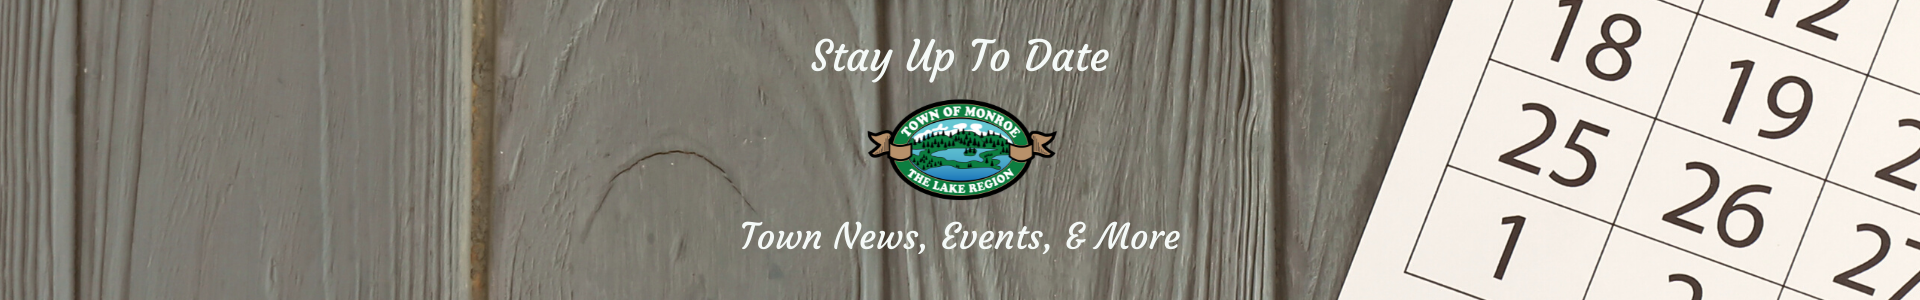 Stay Up to Date with Monroe